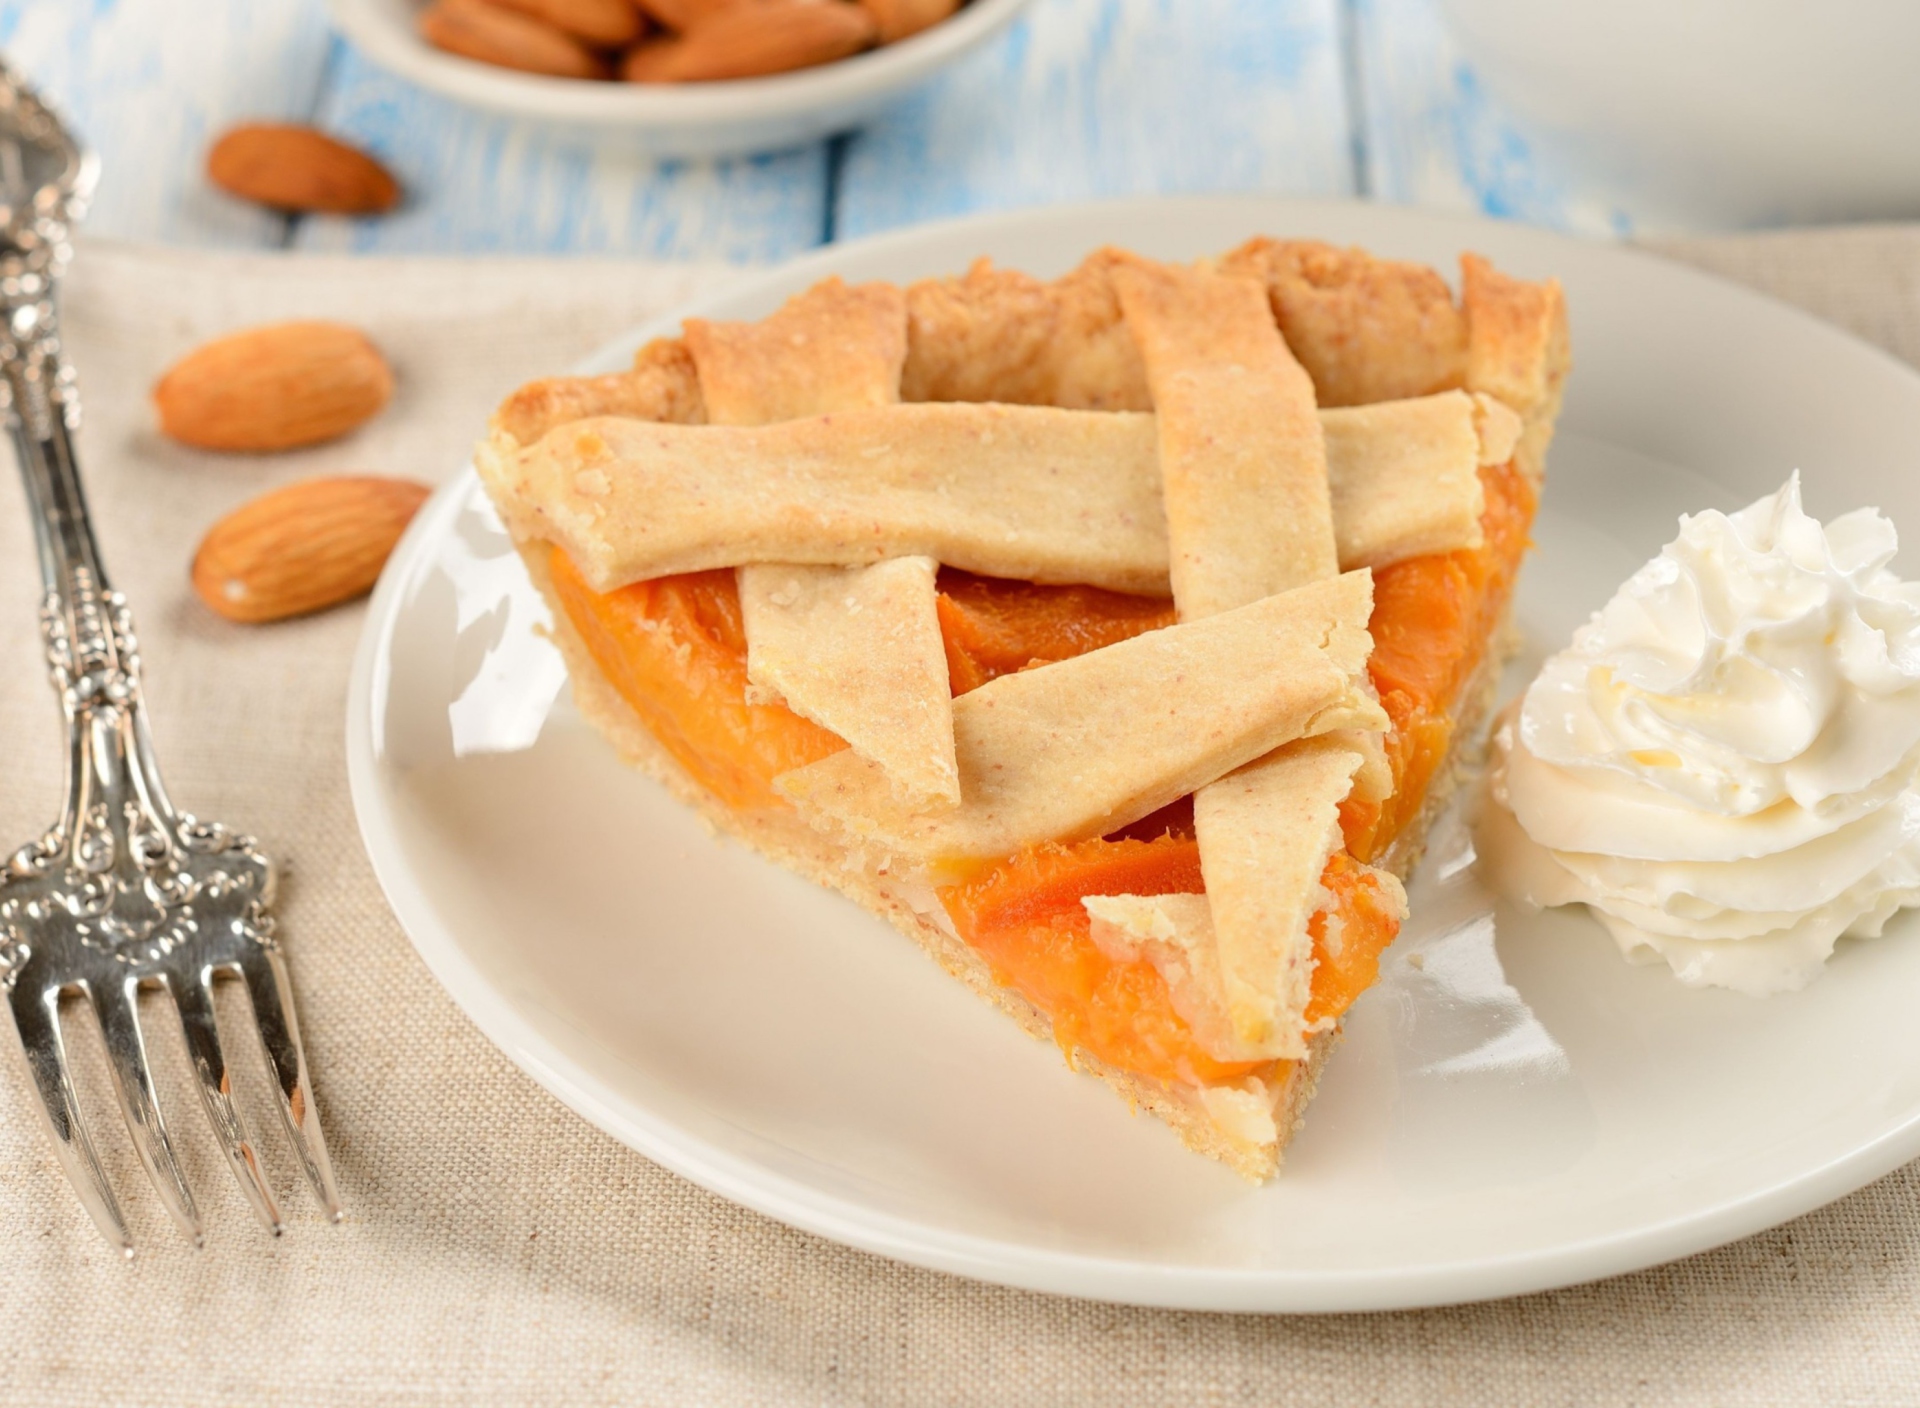 Das Apricot Pie With Whipped Cream Wallpaper 1920x1408